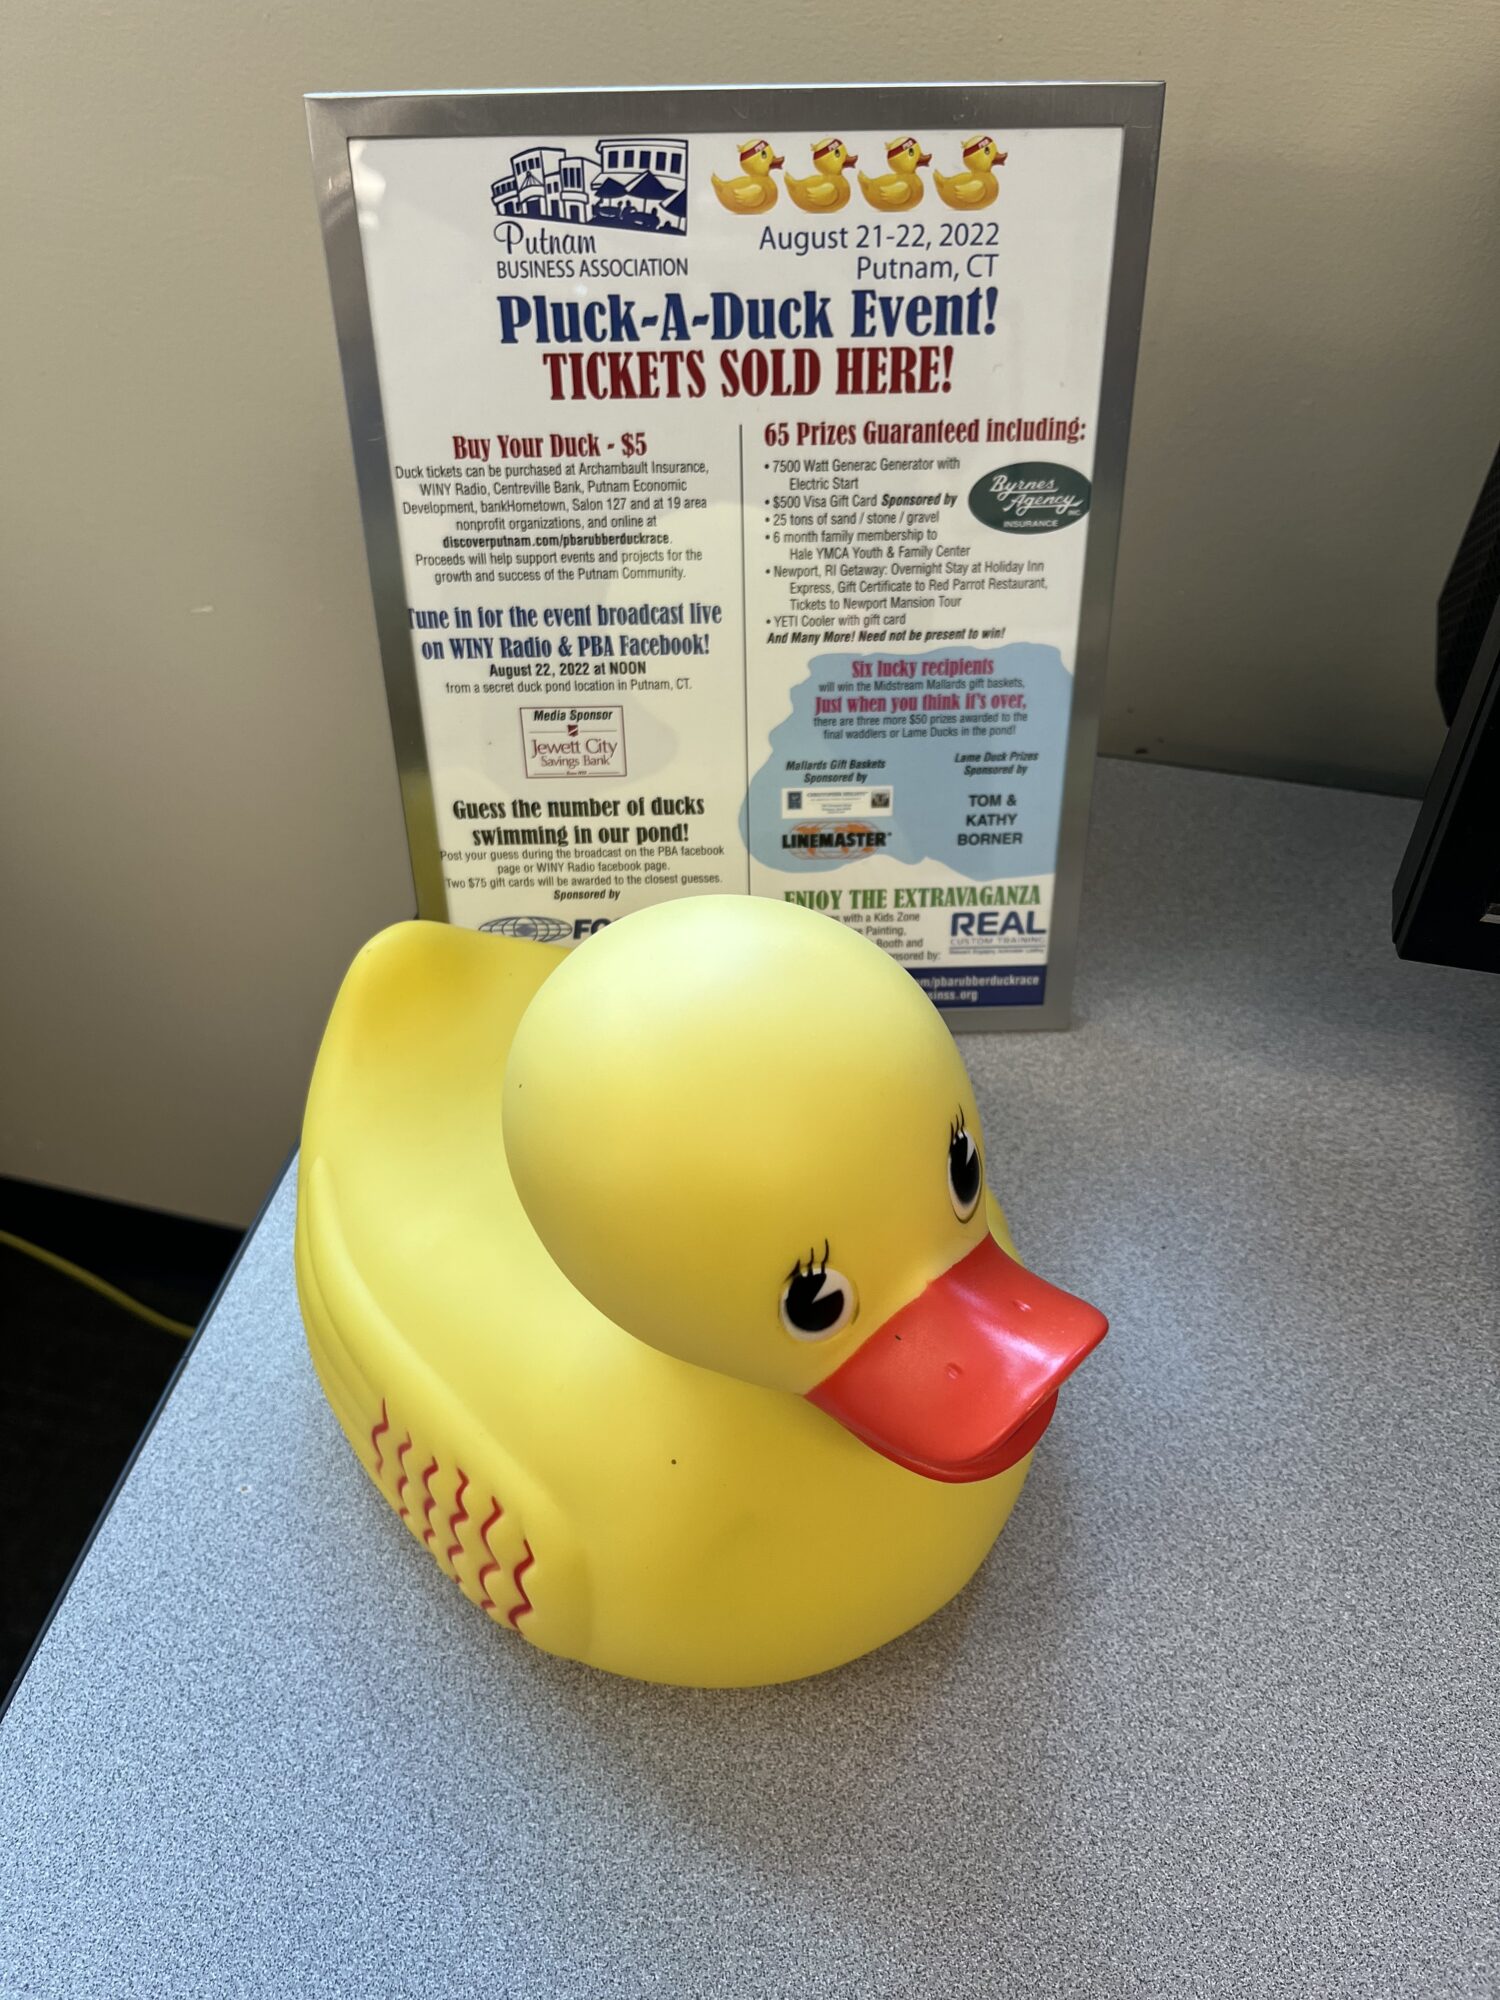 Discover Putnam's Pluck a Duck